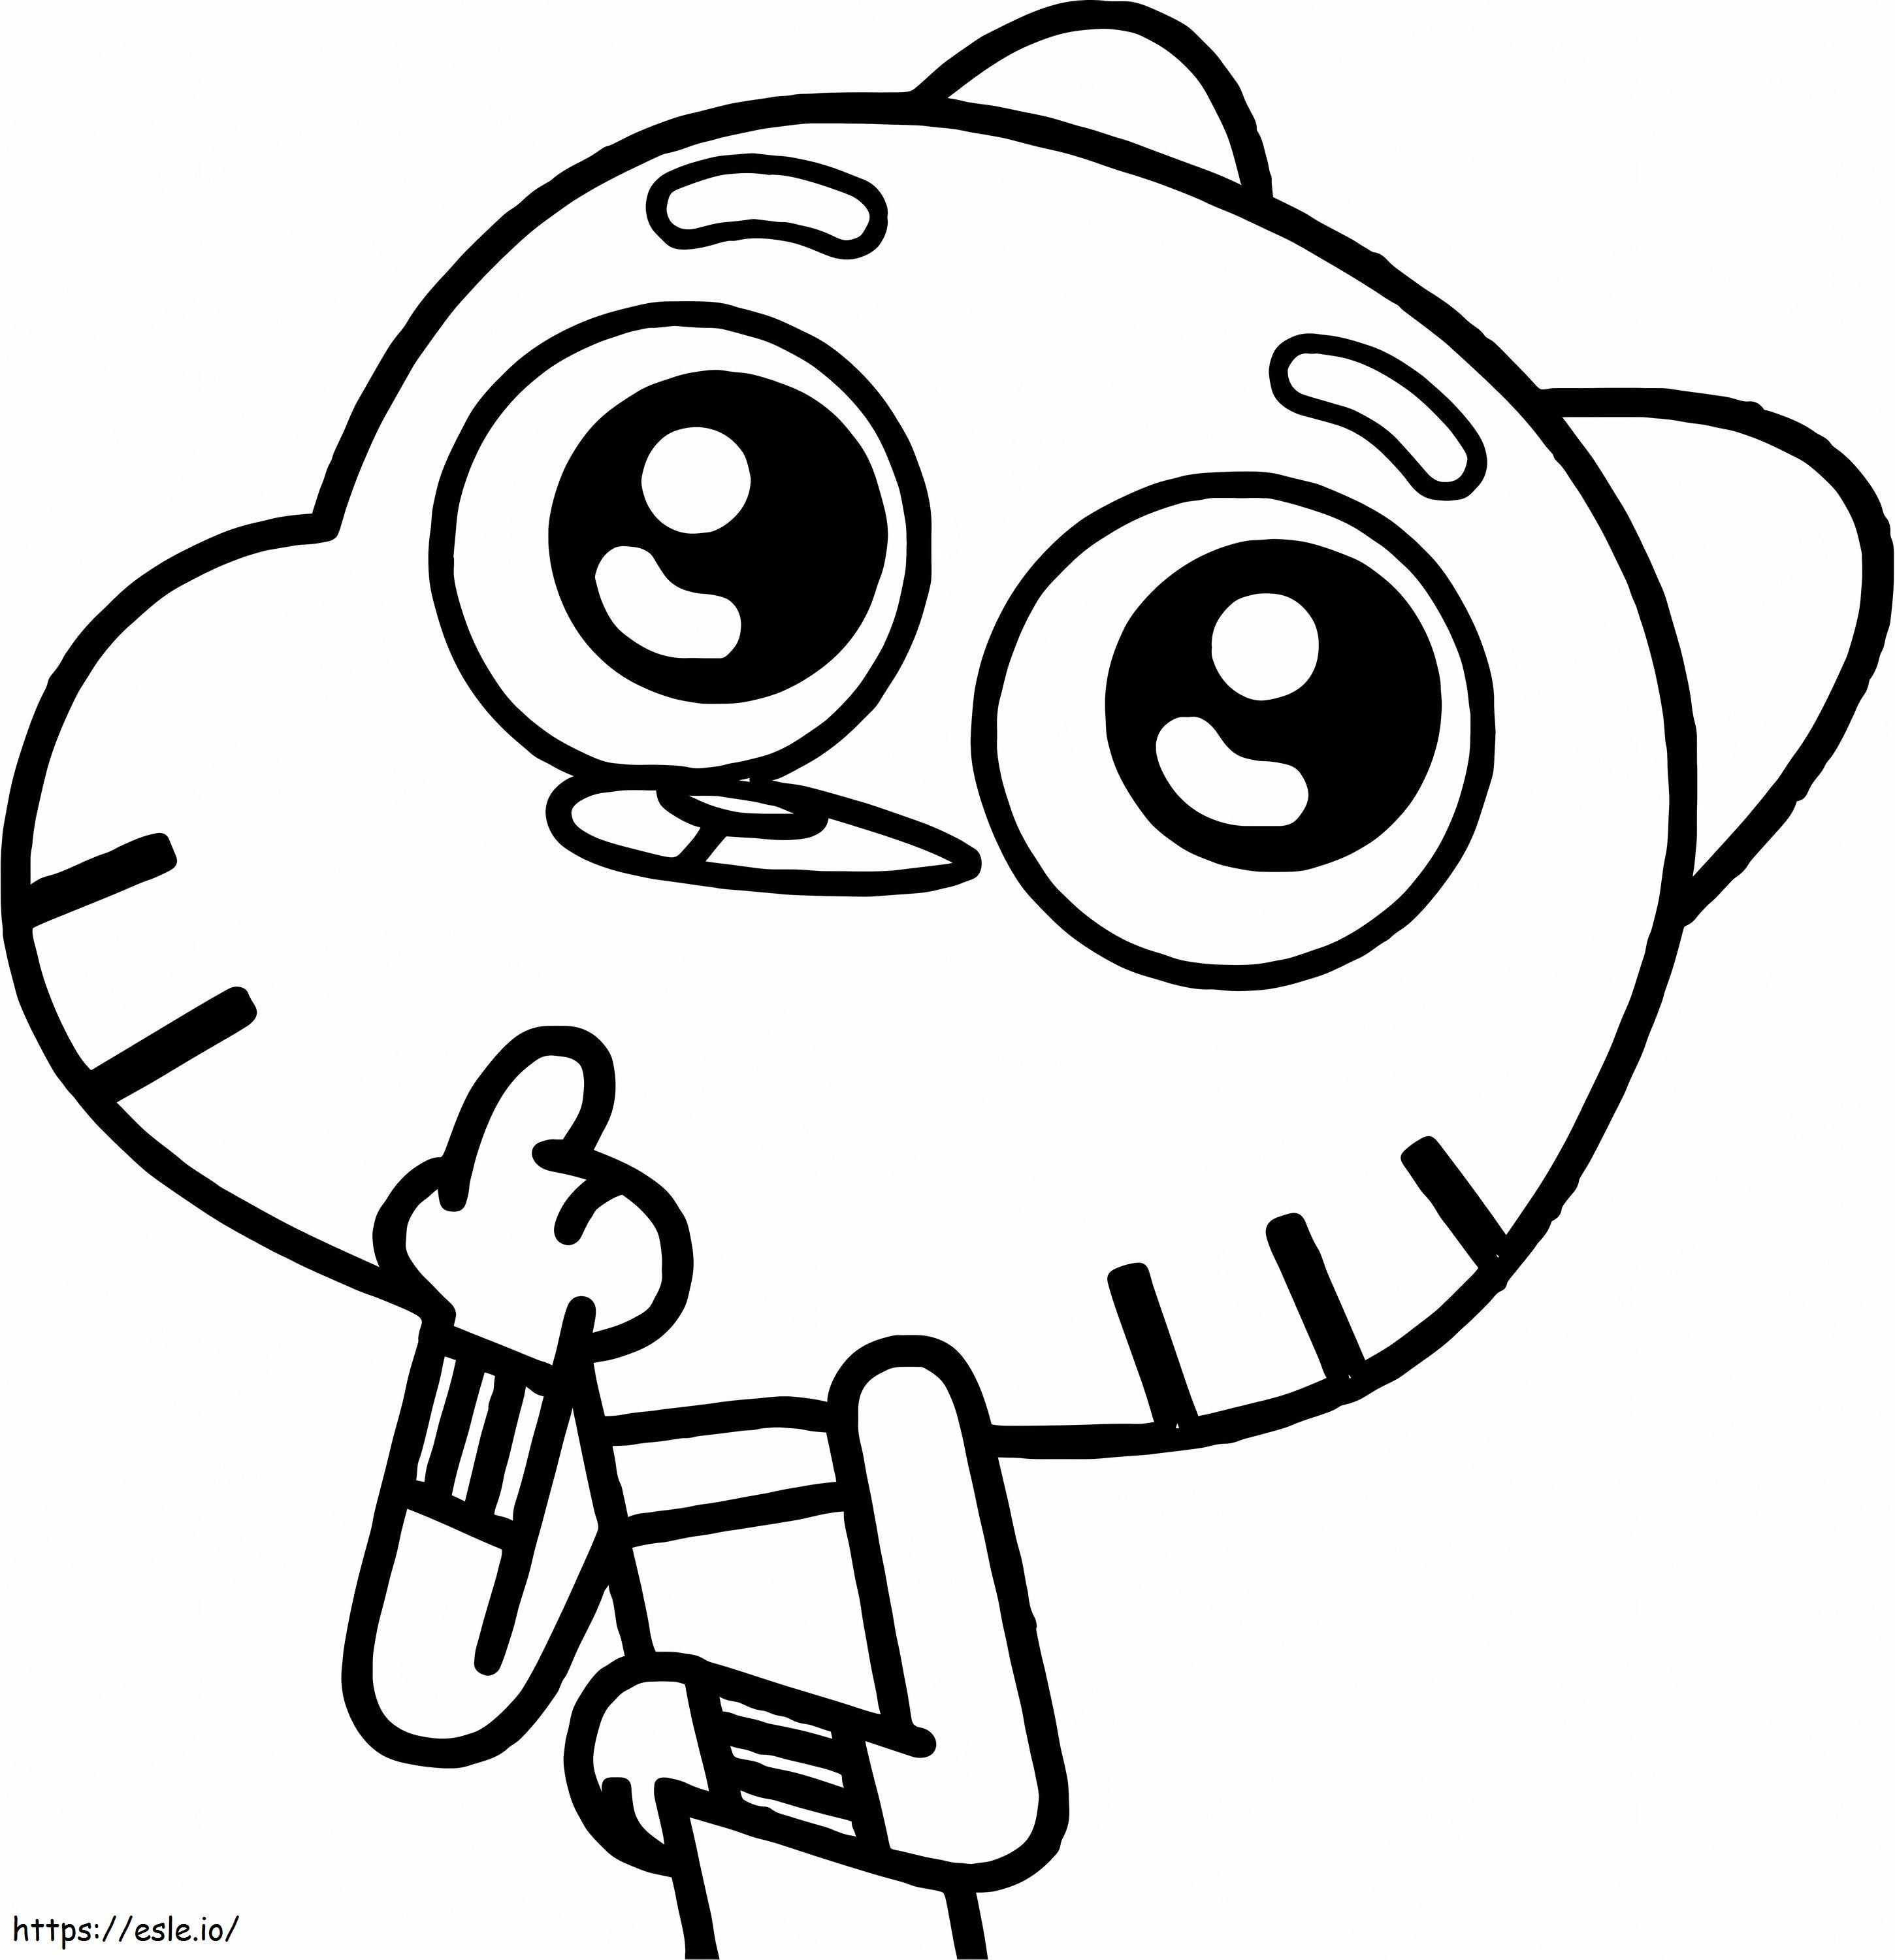 1539939669 Gumball Thinking coloring page